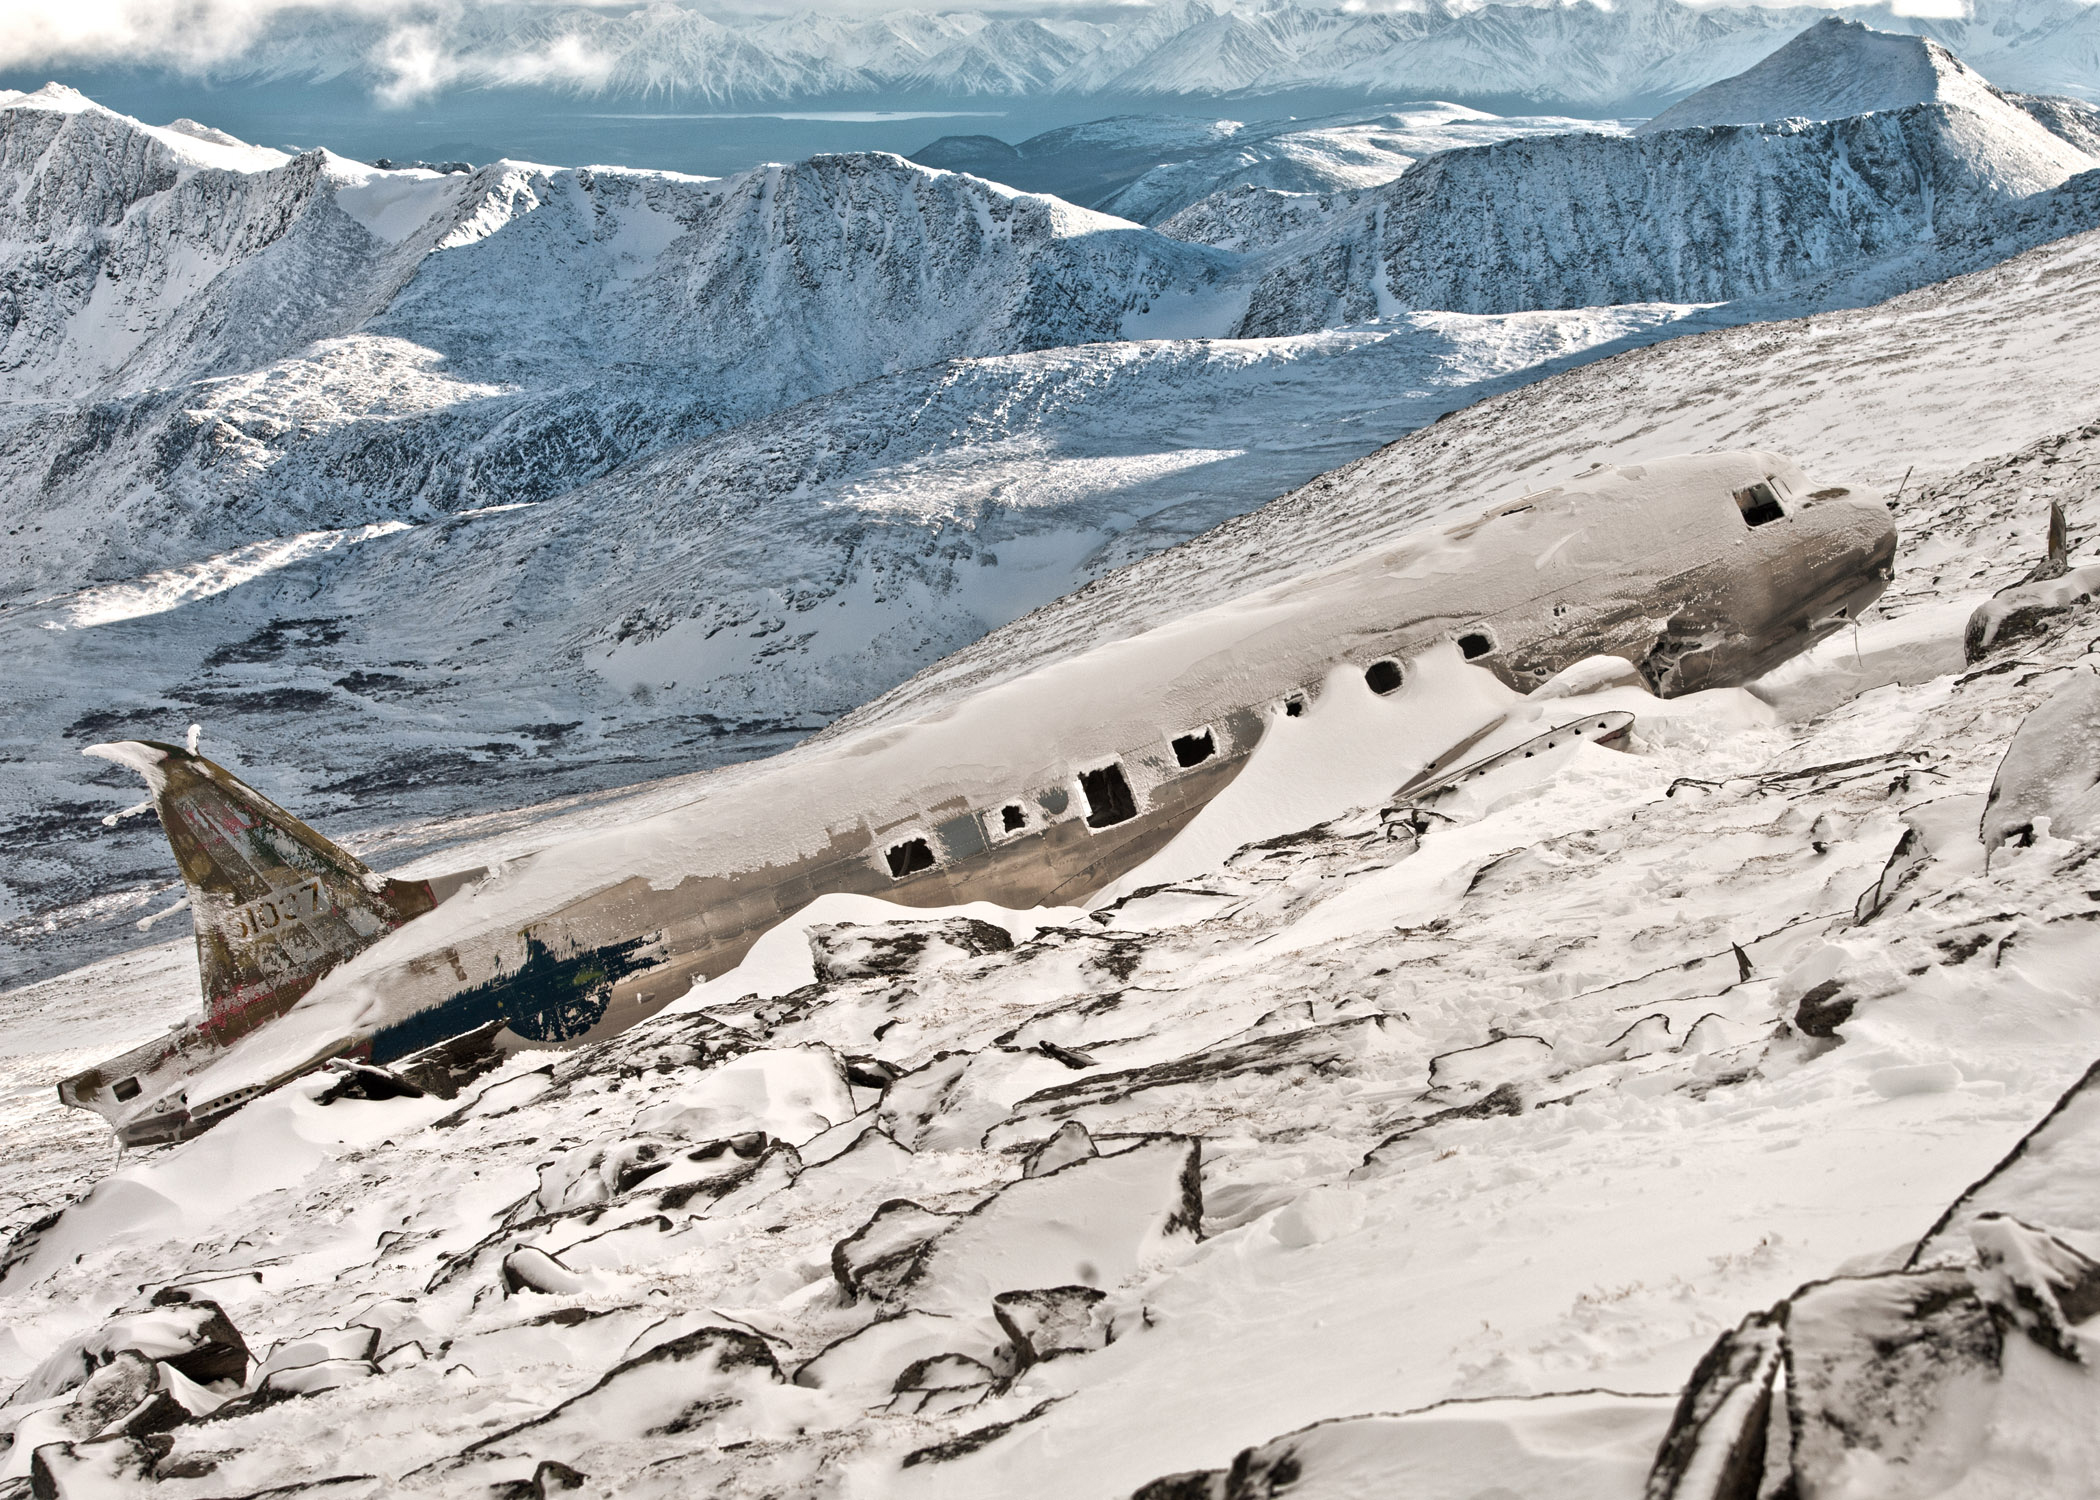 Yukon USAF C-47 Crash site revisited Vol. 2: See the frozen Hell from which the crew escaped.